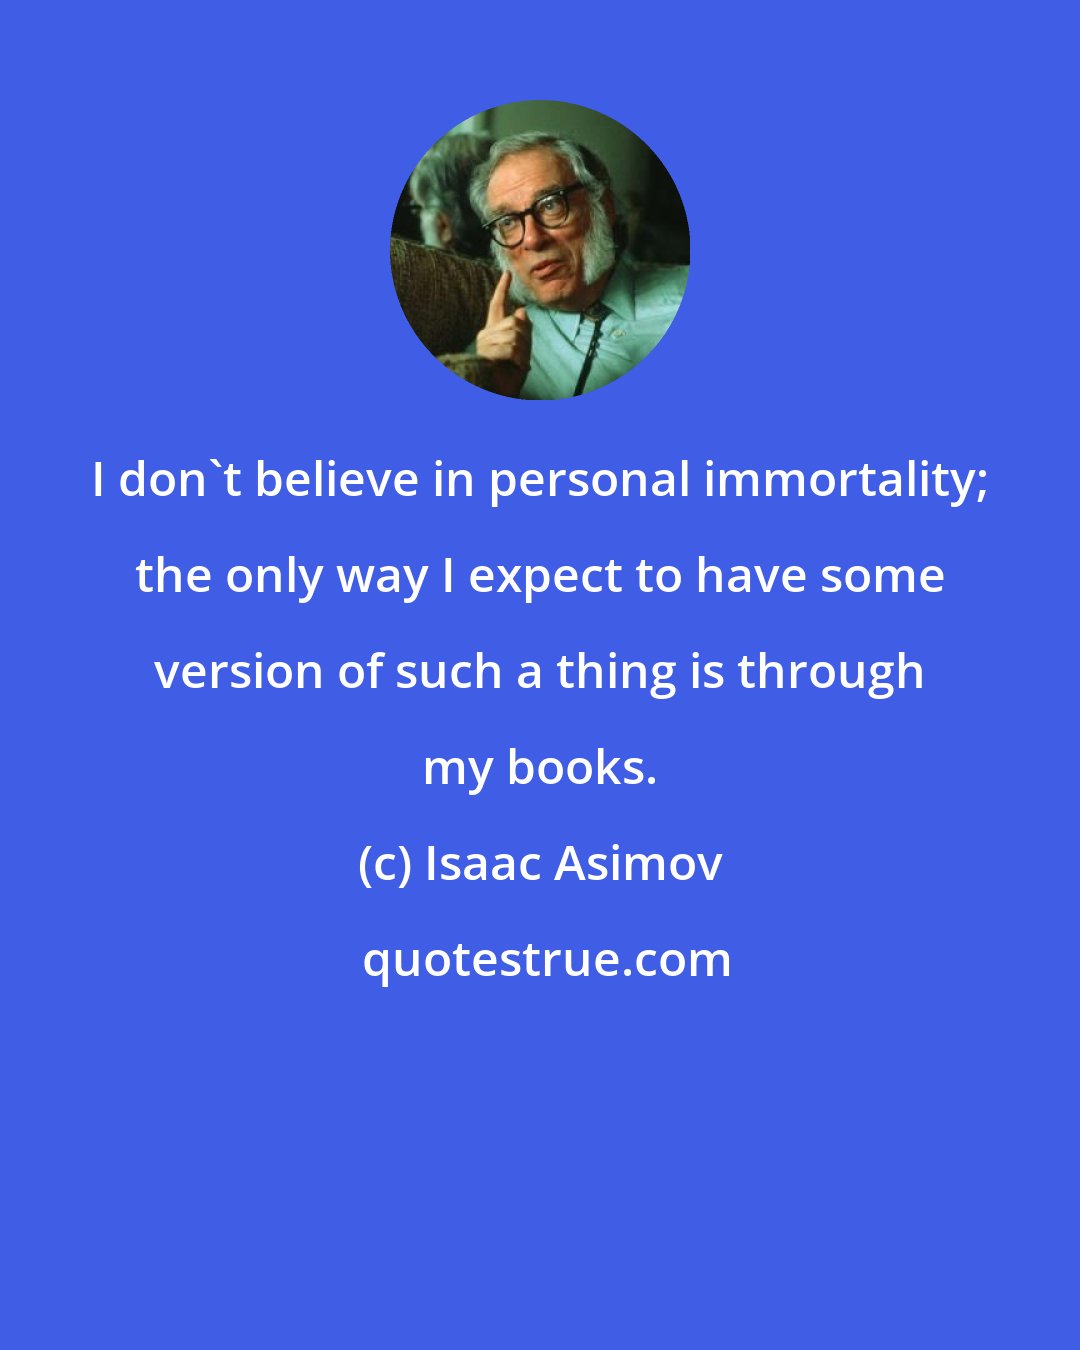 Isaac Asimov: I don't believe in personal immortality; the only way I expect to have some version of such a thing is through my books.